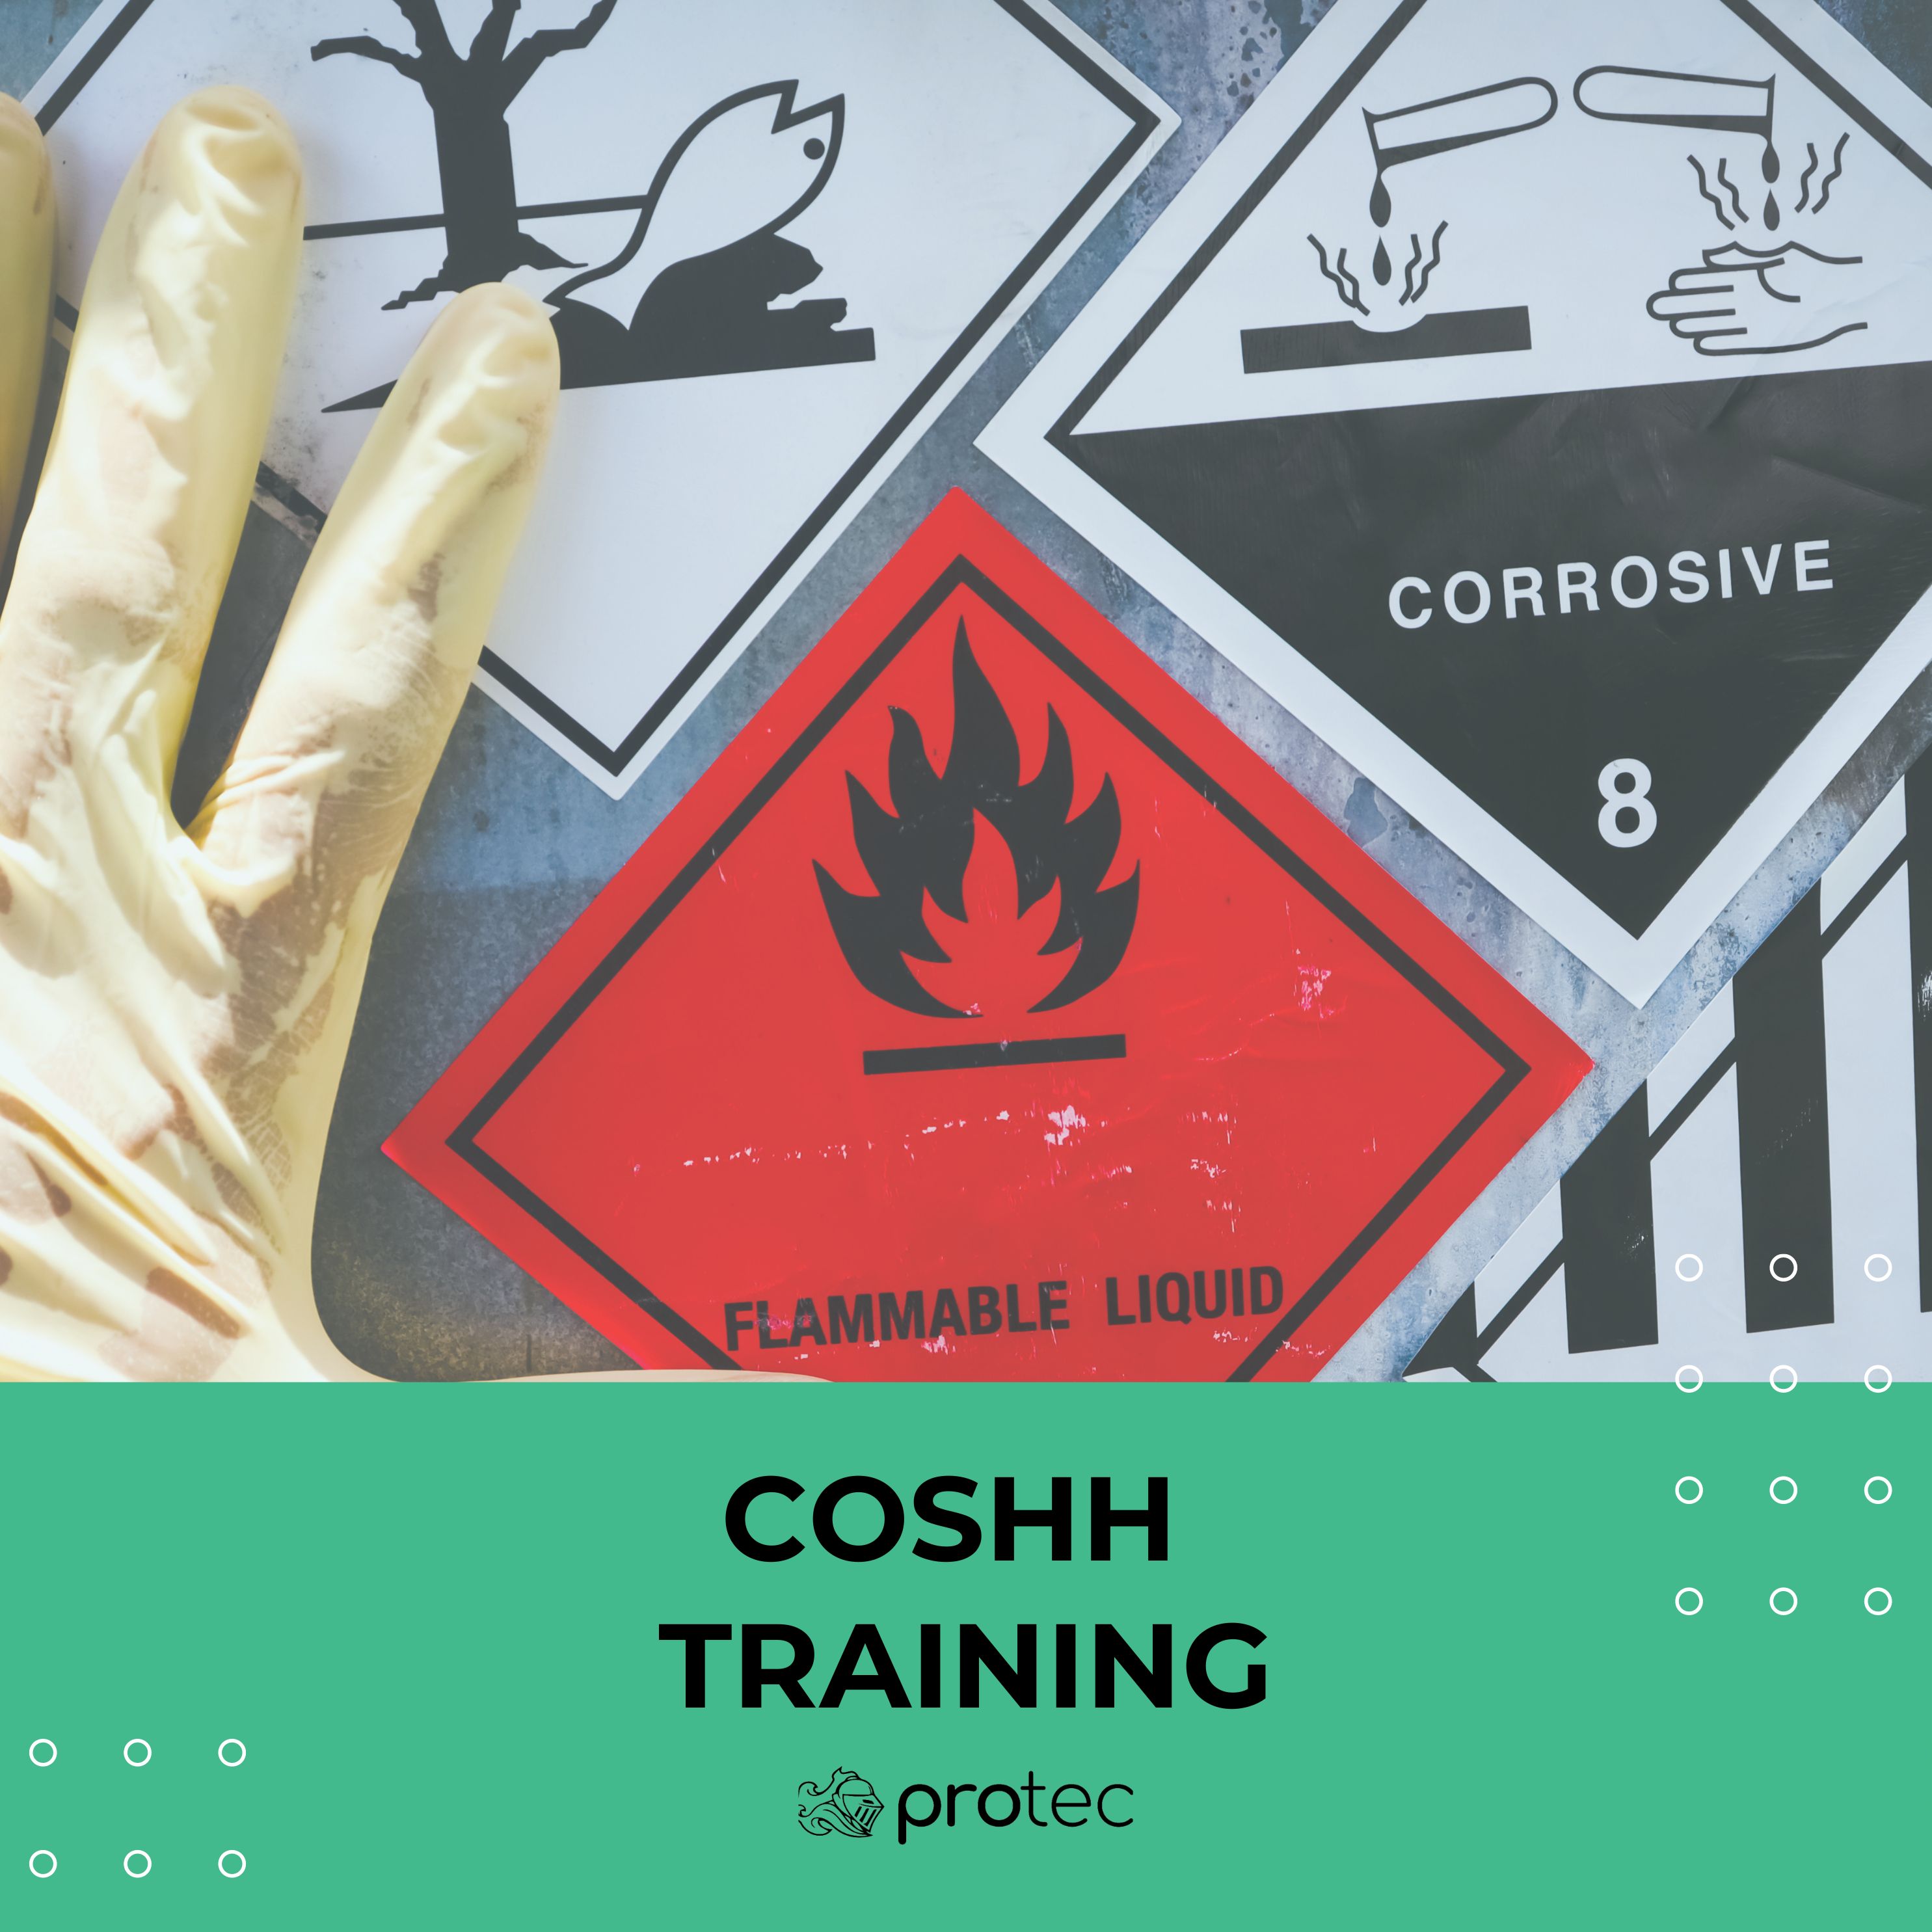 COSHH Training Course: Ensuring Compliance & Safety with Protec